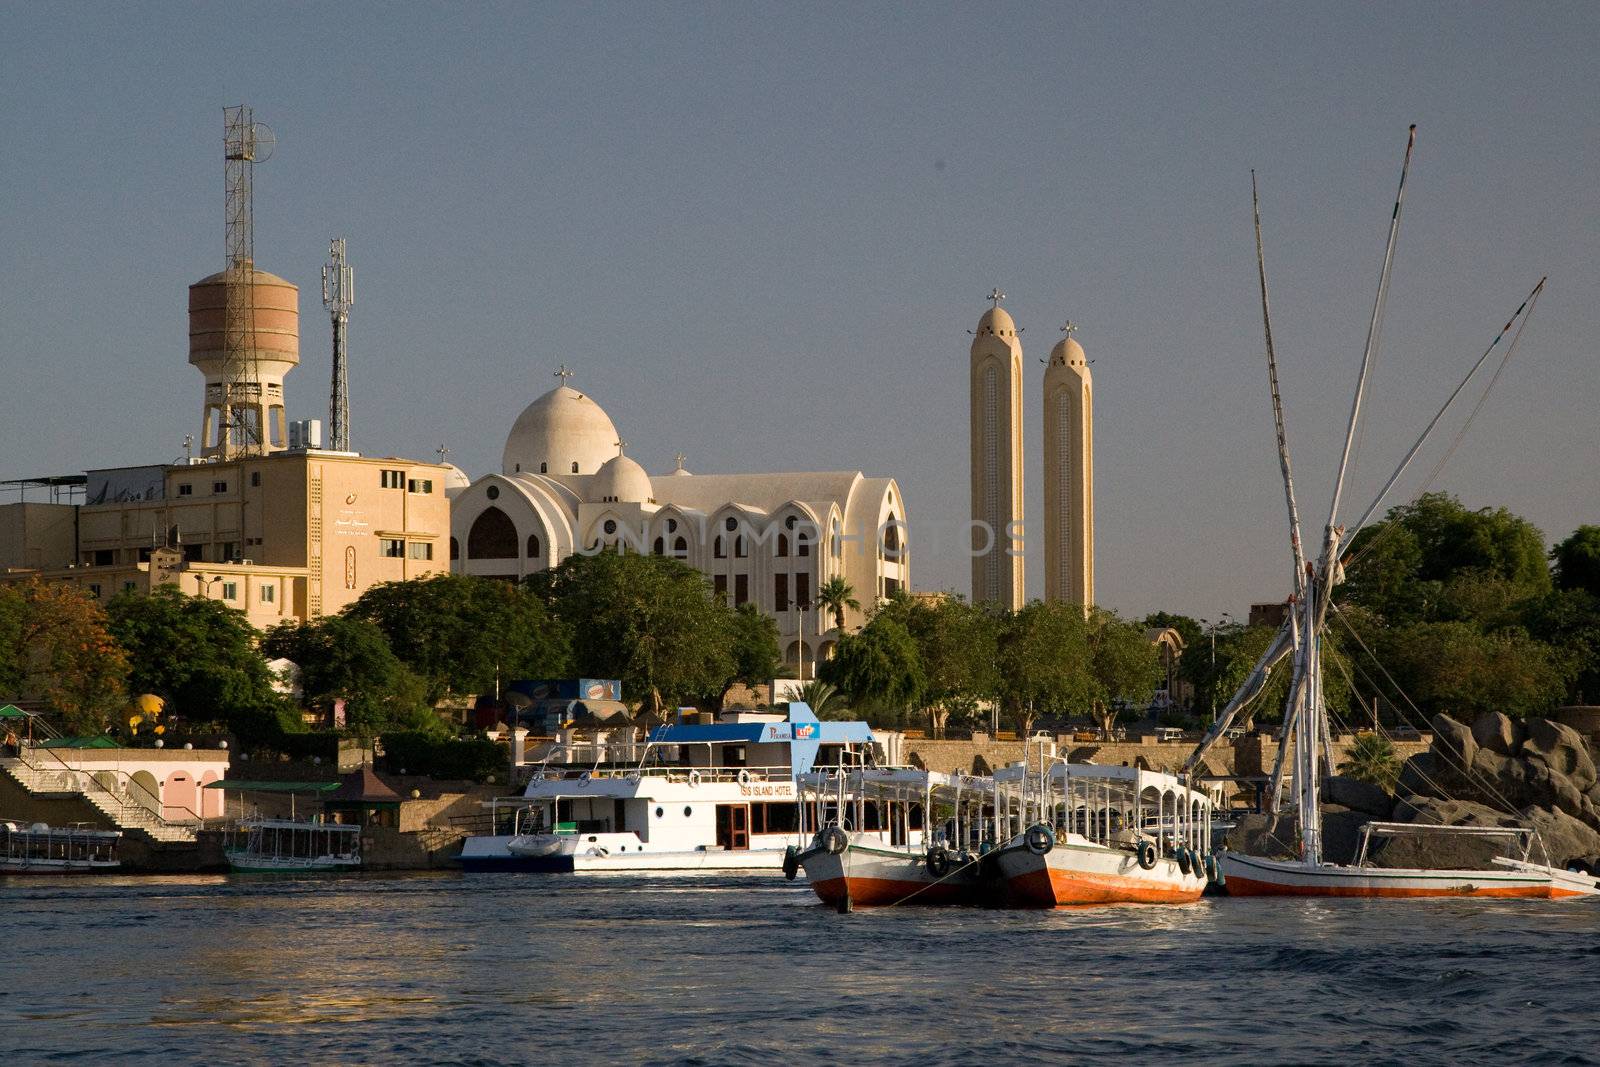 We take a closer look at life on Nile River on MAY 27, 2008, while having a felucca sailboat ride from Aswan to Elephantine Island and to a nubian village.